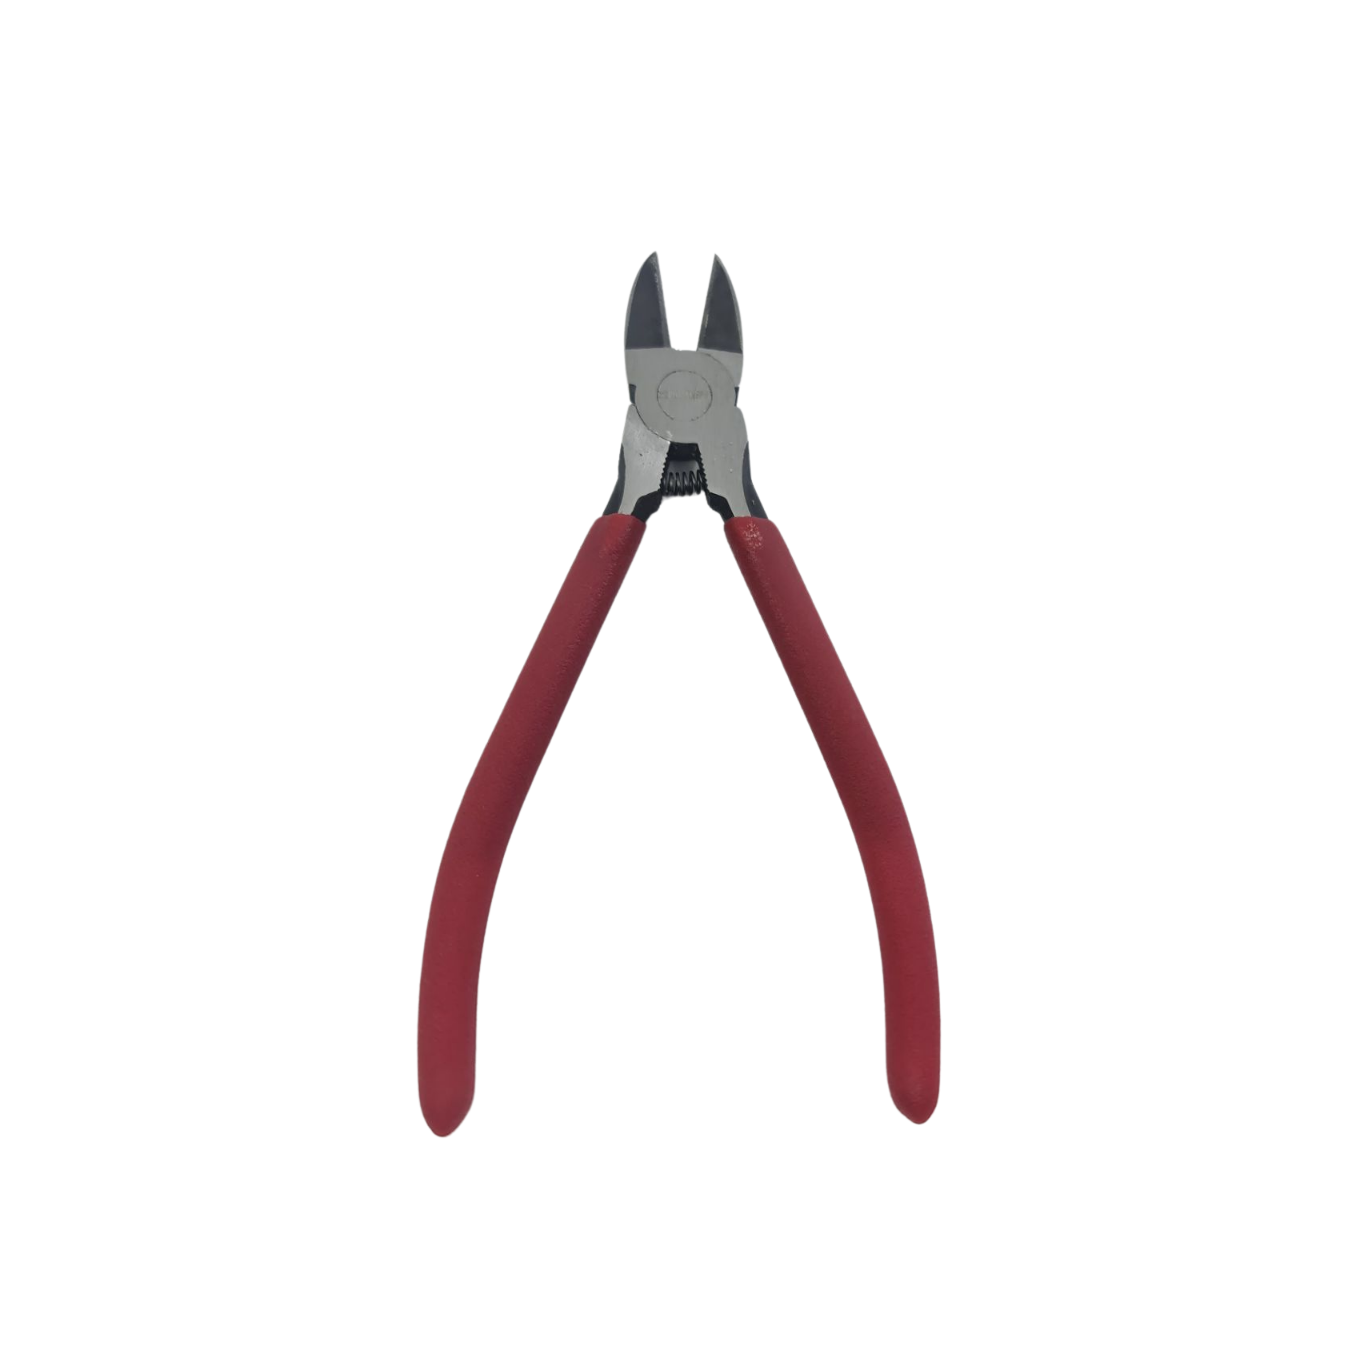 Large Side Cutter Snips for 3D Printing & Silicone Wire Cable